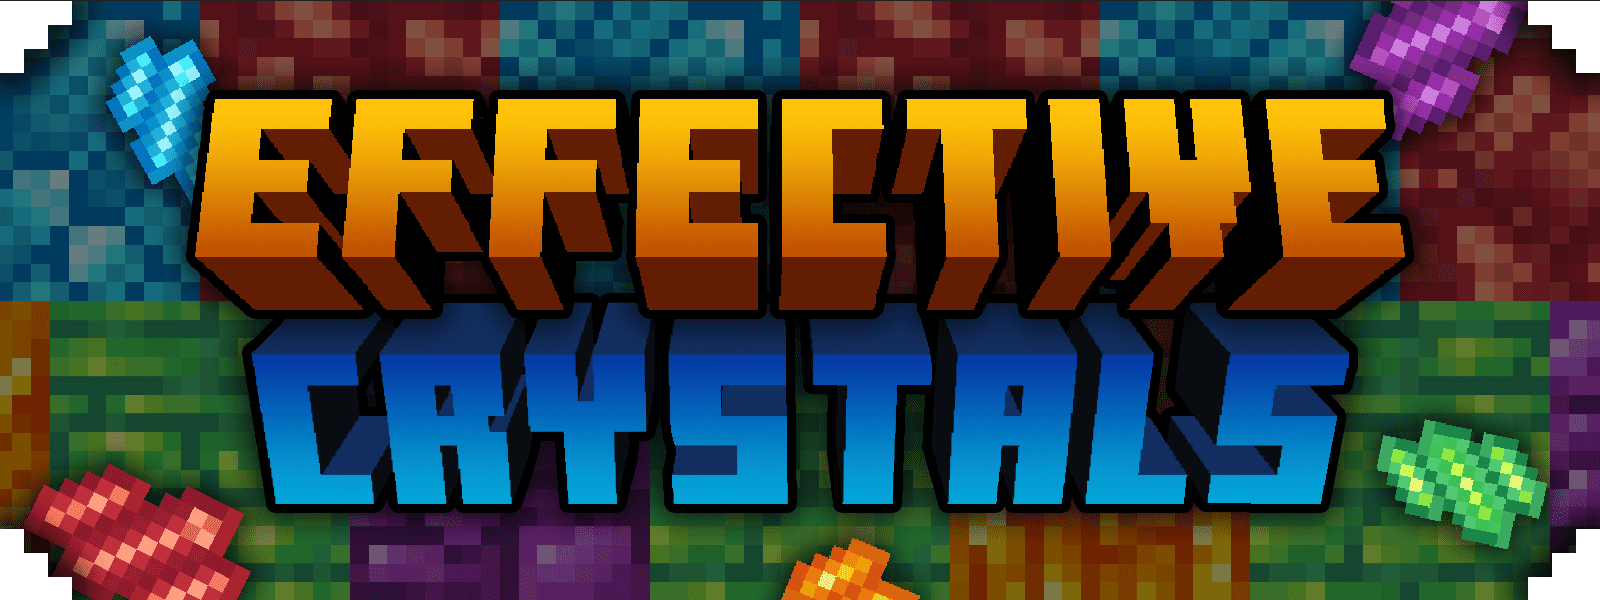 Effective Crystals Mod (1.19.2) - New Crystal Lamps 1